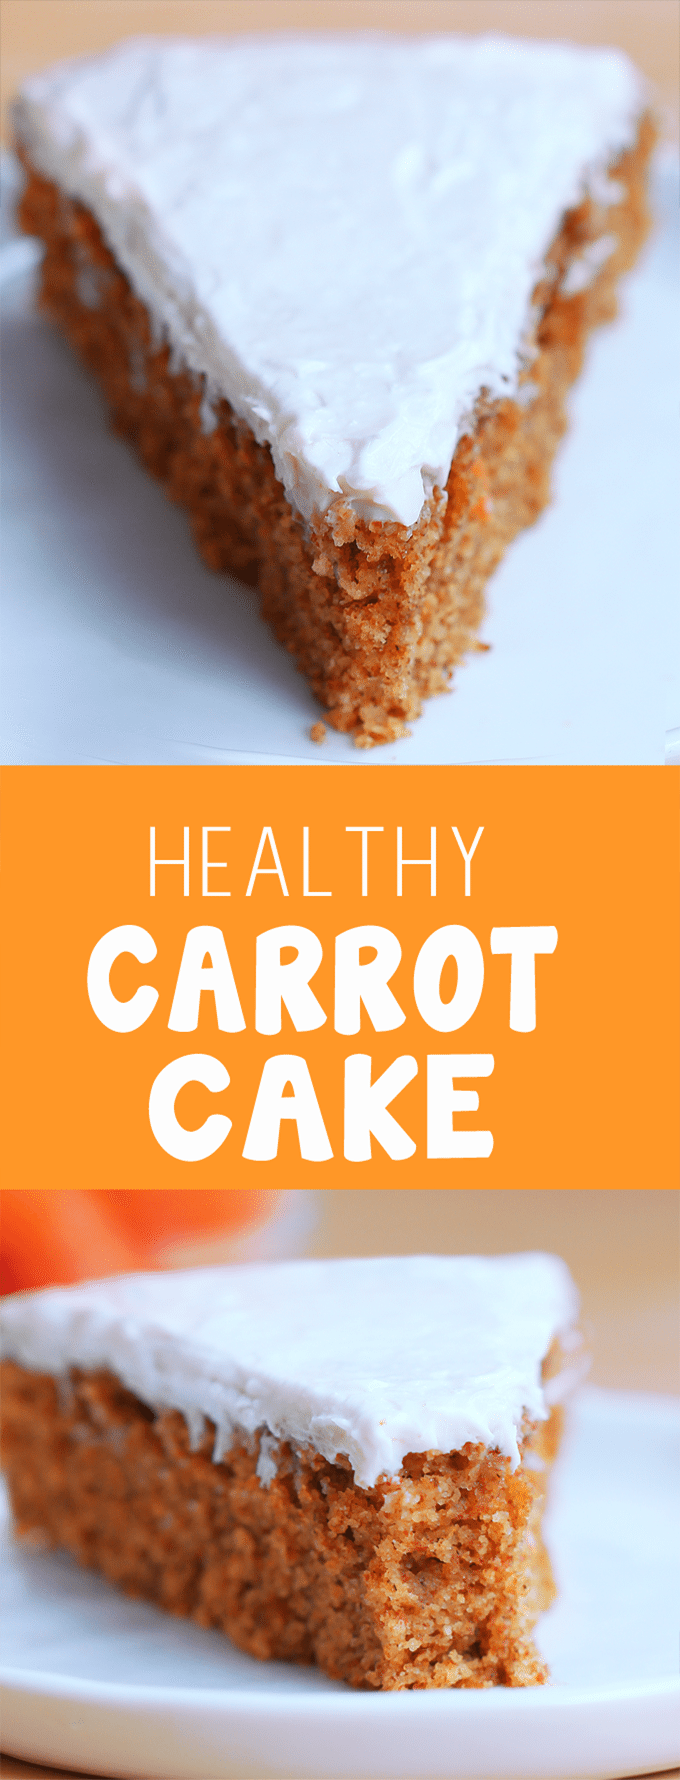 Super Moist Classic Carrot Cake - With a secretly healthy cream cheese icing... This is hands-down my favorite carrot cake recipe, & it's even good for breakfast! @choccoveredkt... https://chocolatecoveredkatie.com/